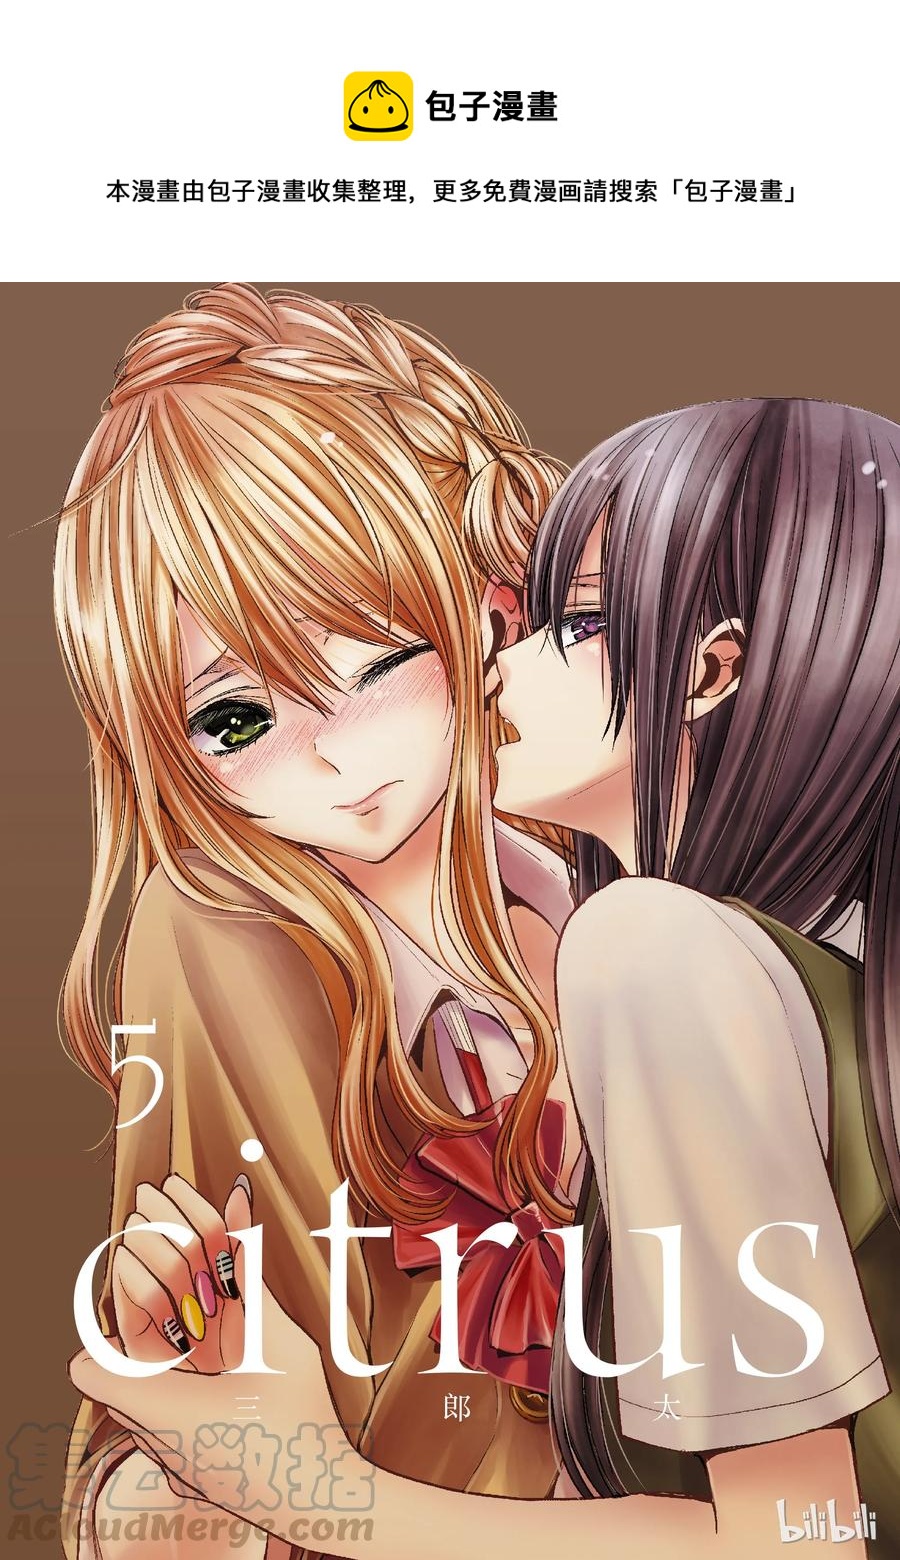 citrus 柑橘味香氣 - 17 to be in love - 1